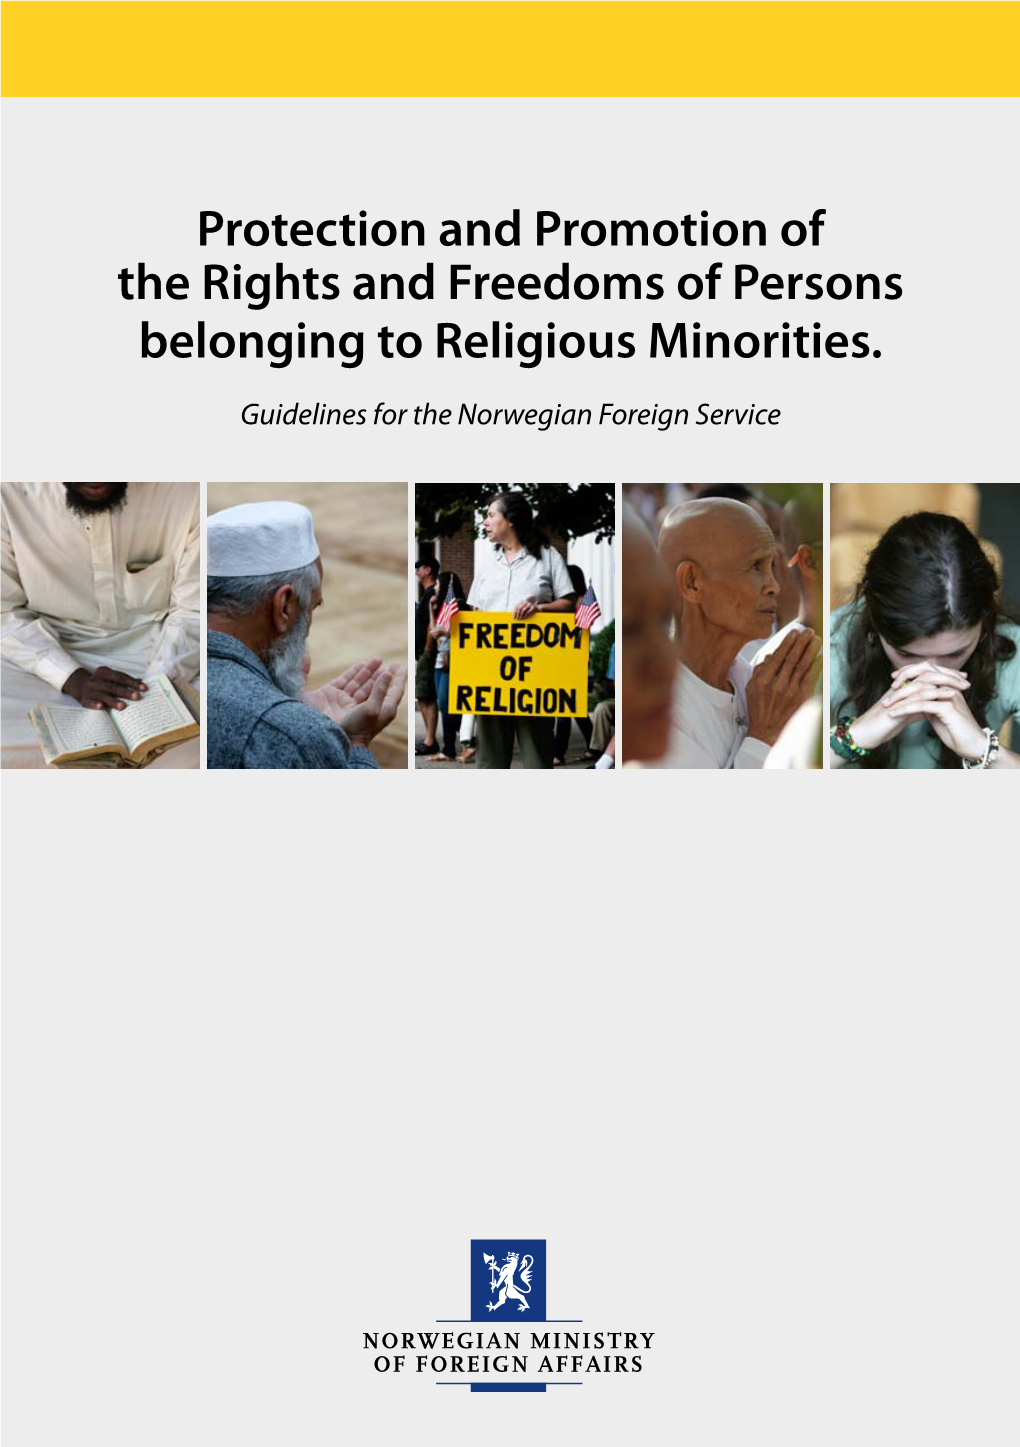 Protection and Promotion of the Rights and Freedoms of Persons Belonging to Religious Minorities